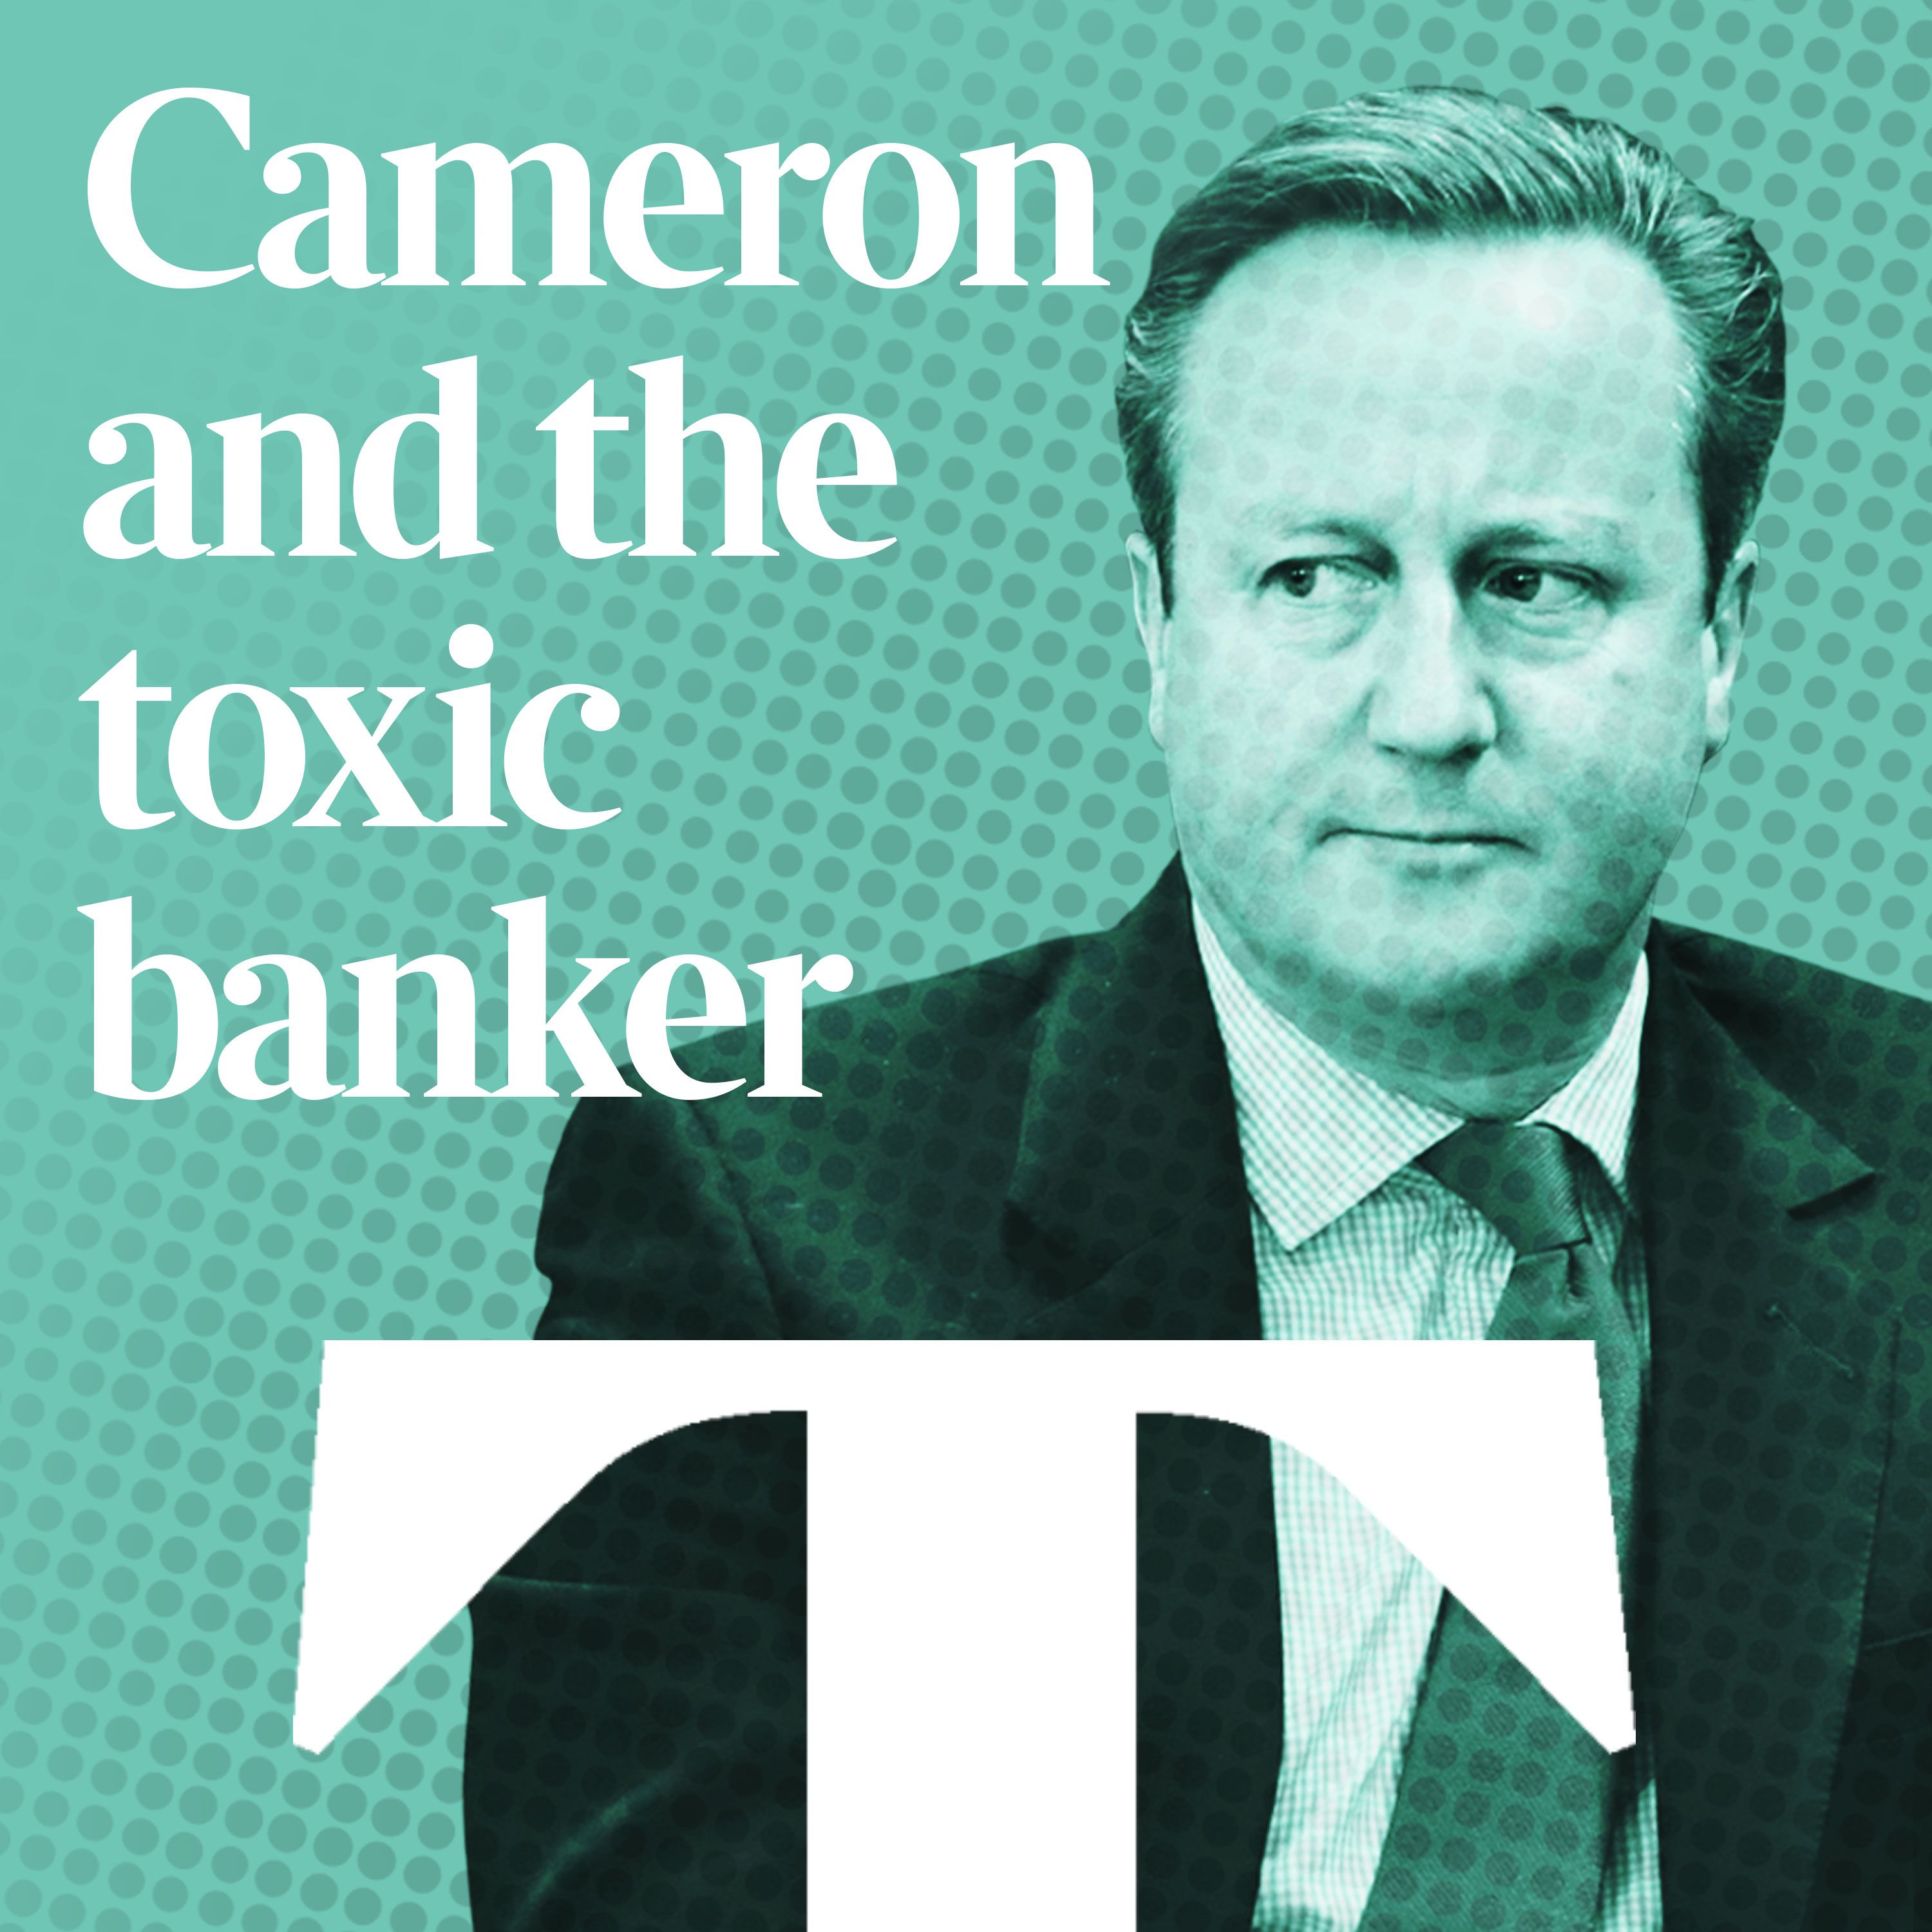 Cameron and the toxic banker (Pt 6): Questions and Answers